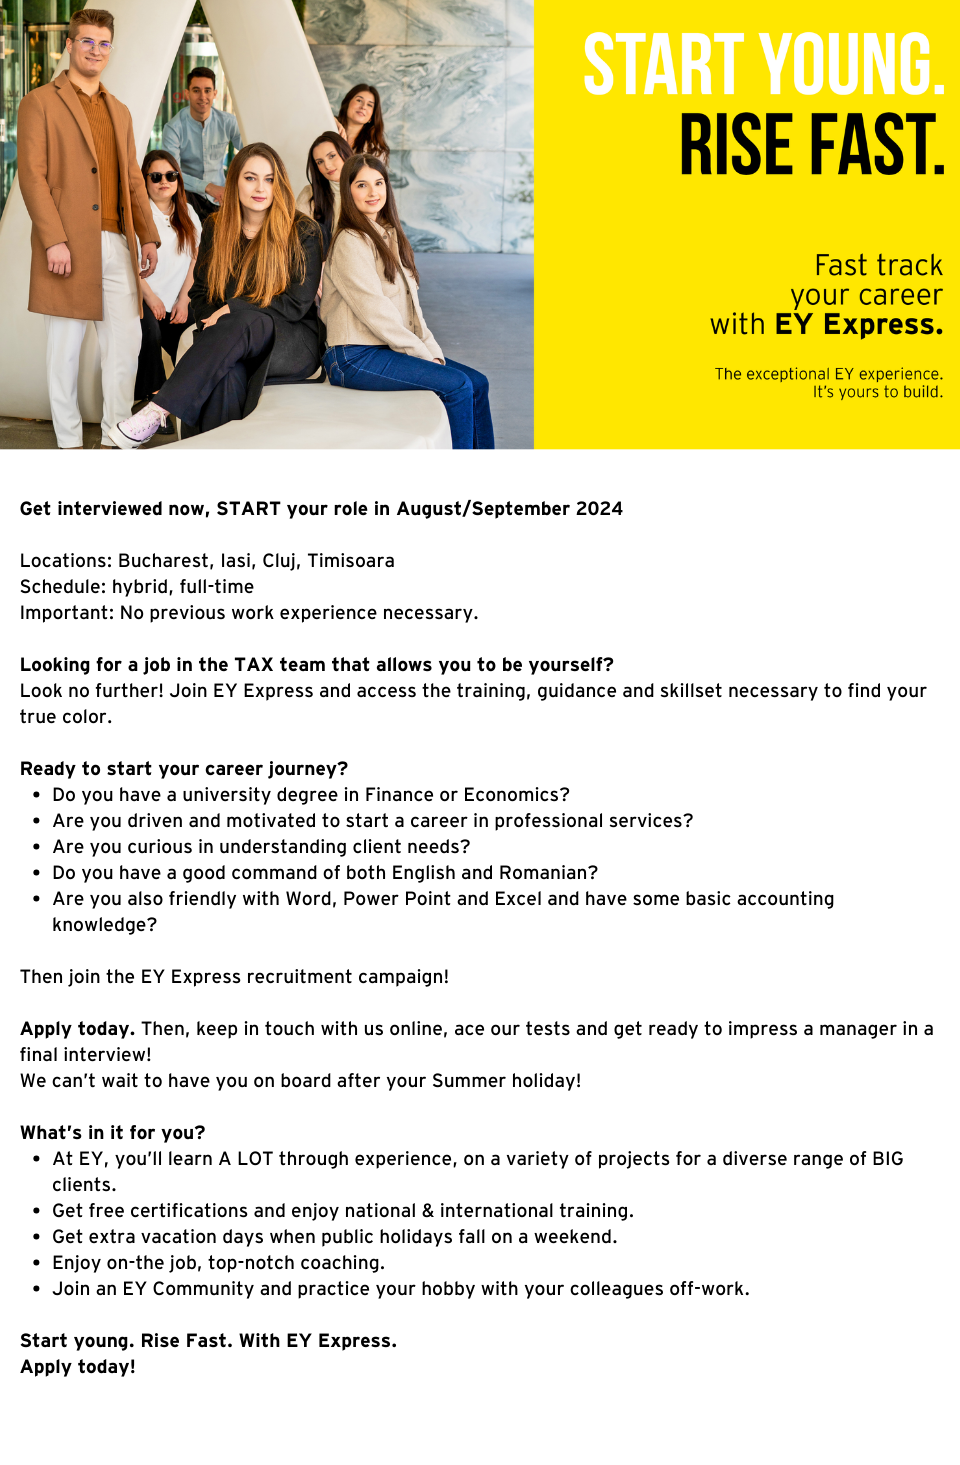 Junior Tax Consultant - EY Express